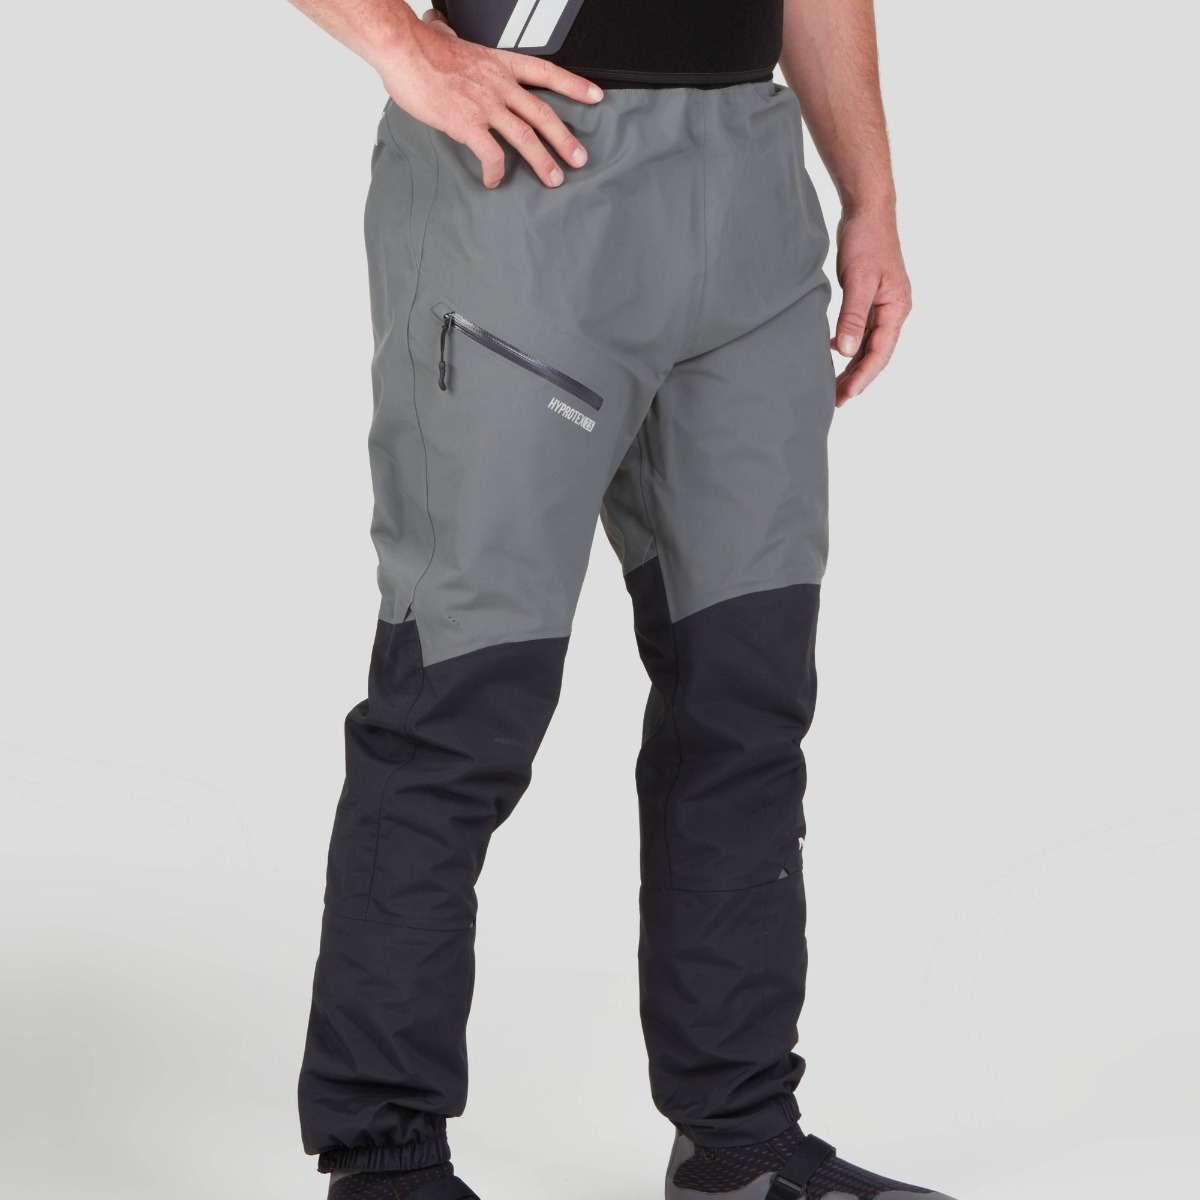 NRS Freefall Men's Dry Trousers Gray